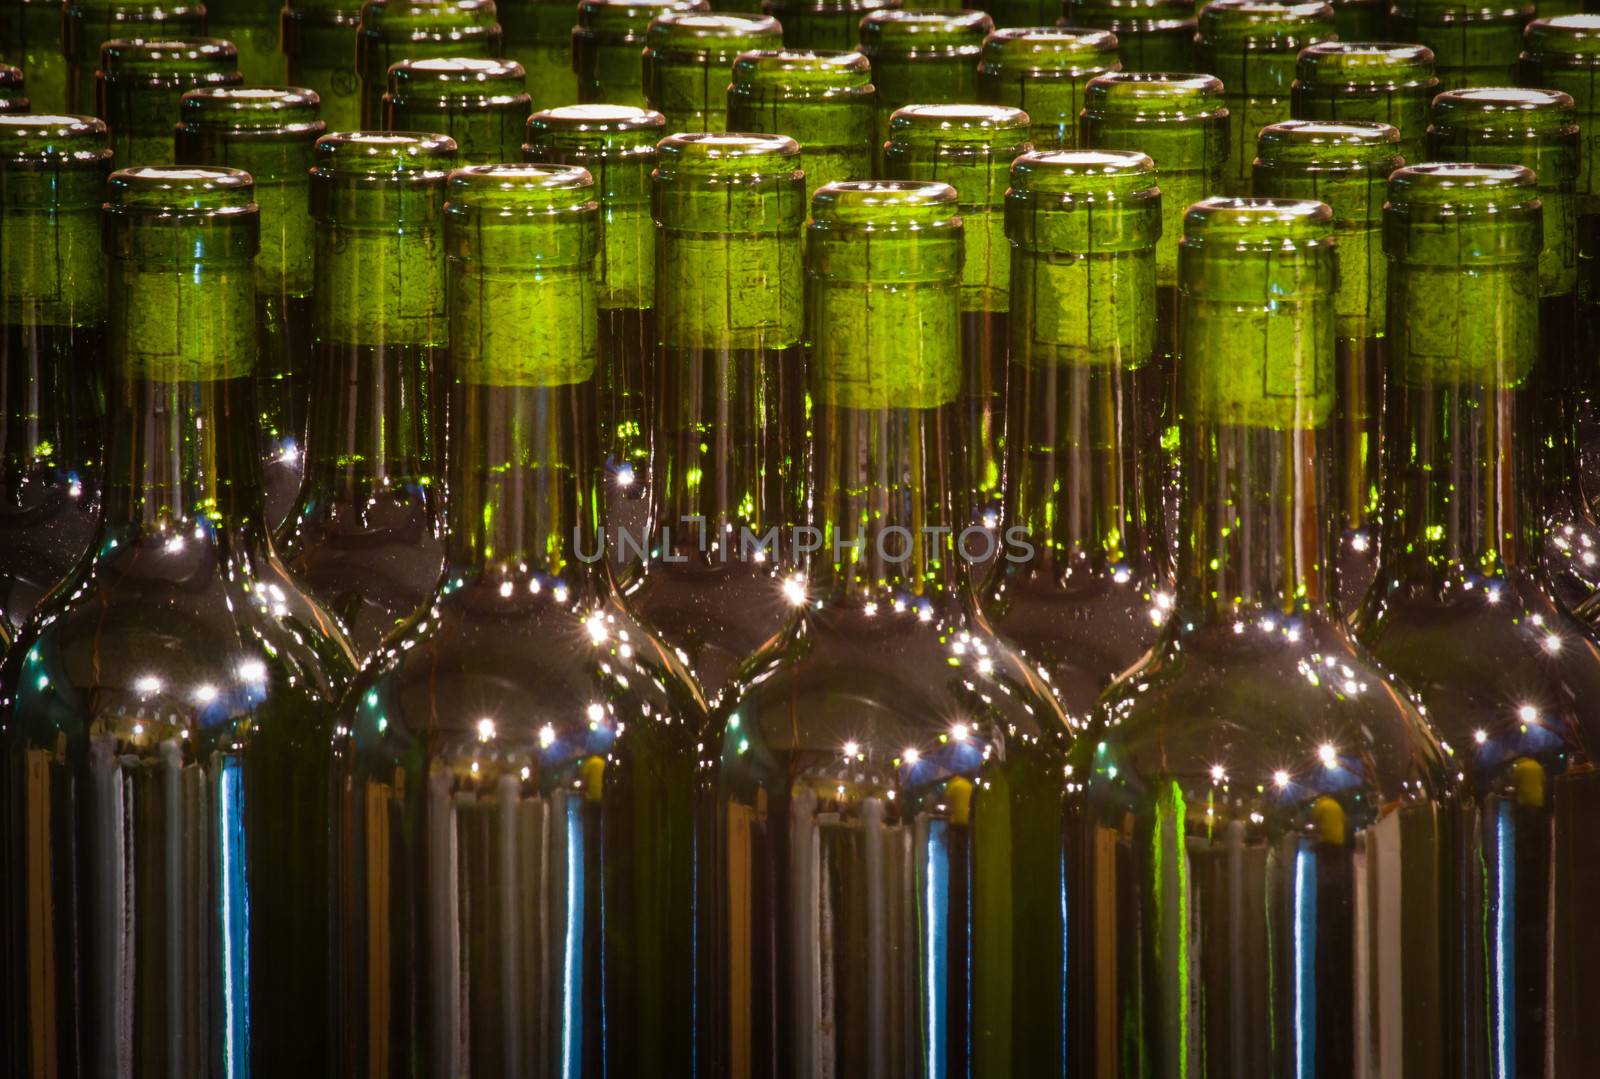 green glass bottles with cork in a wine factory